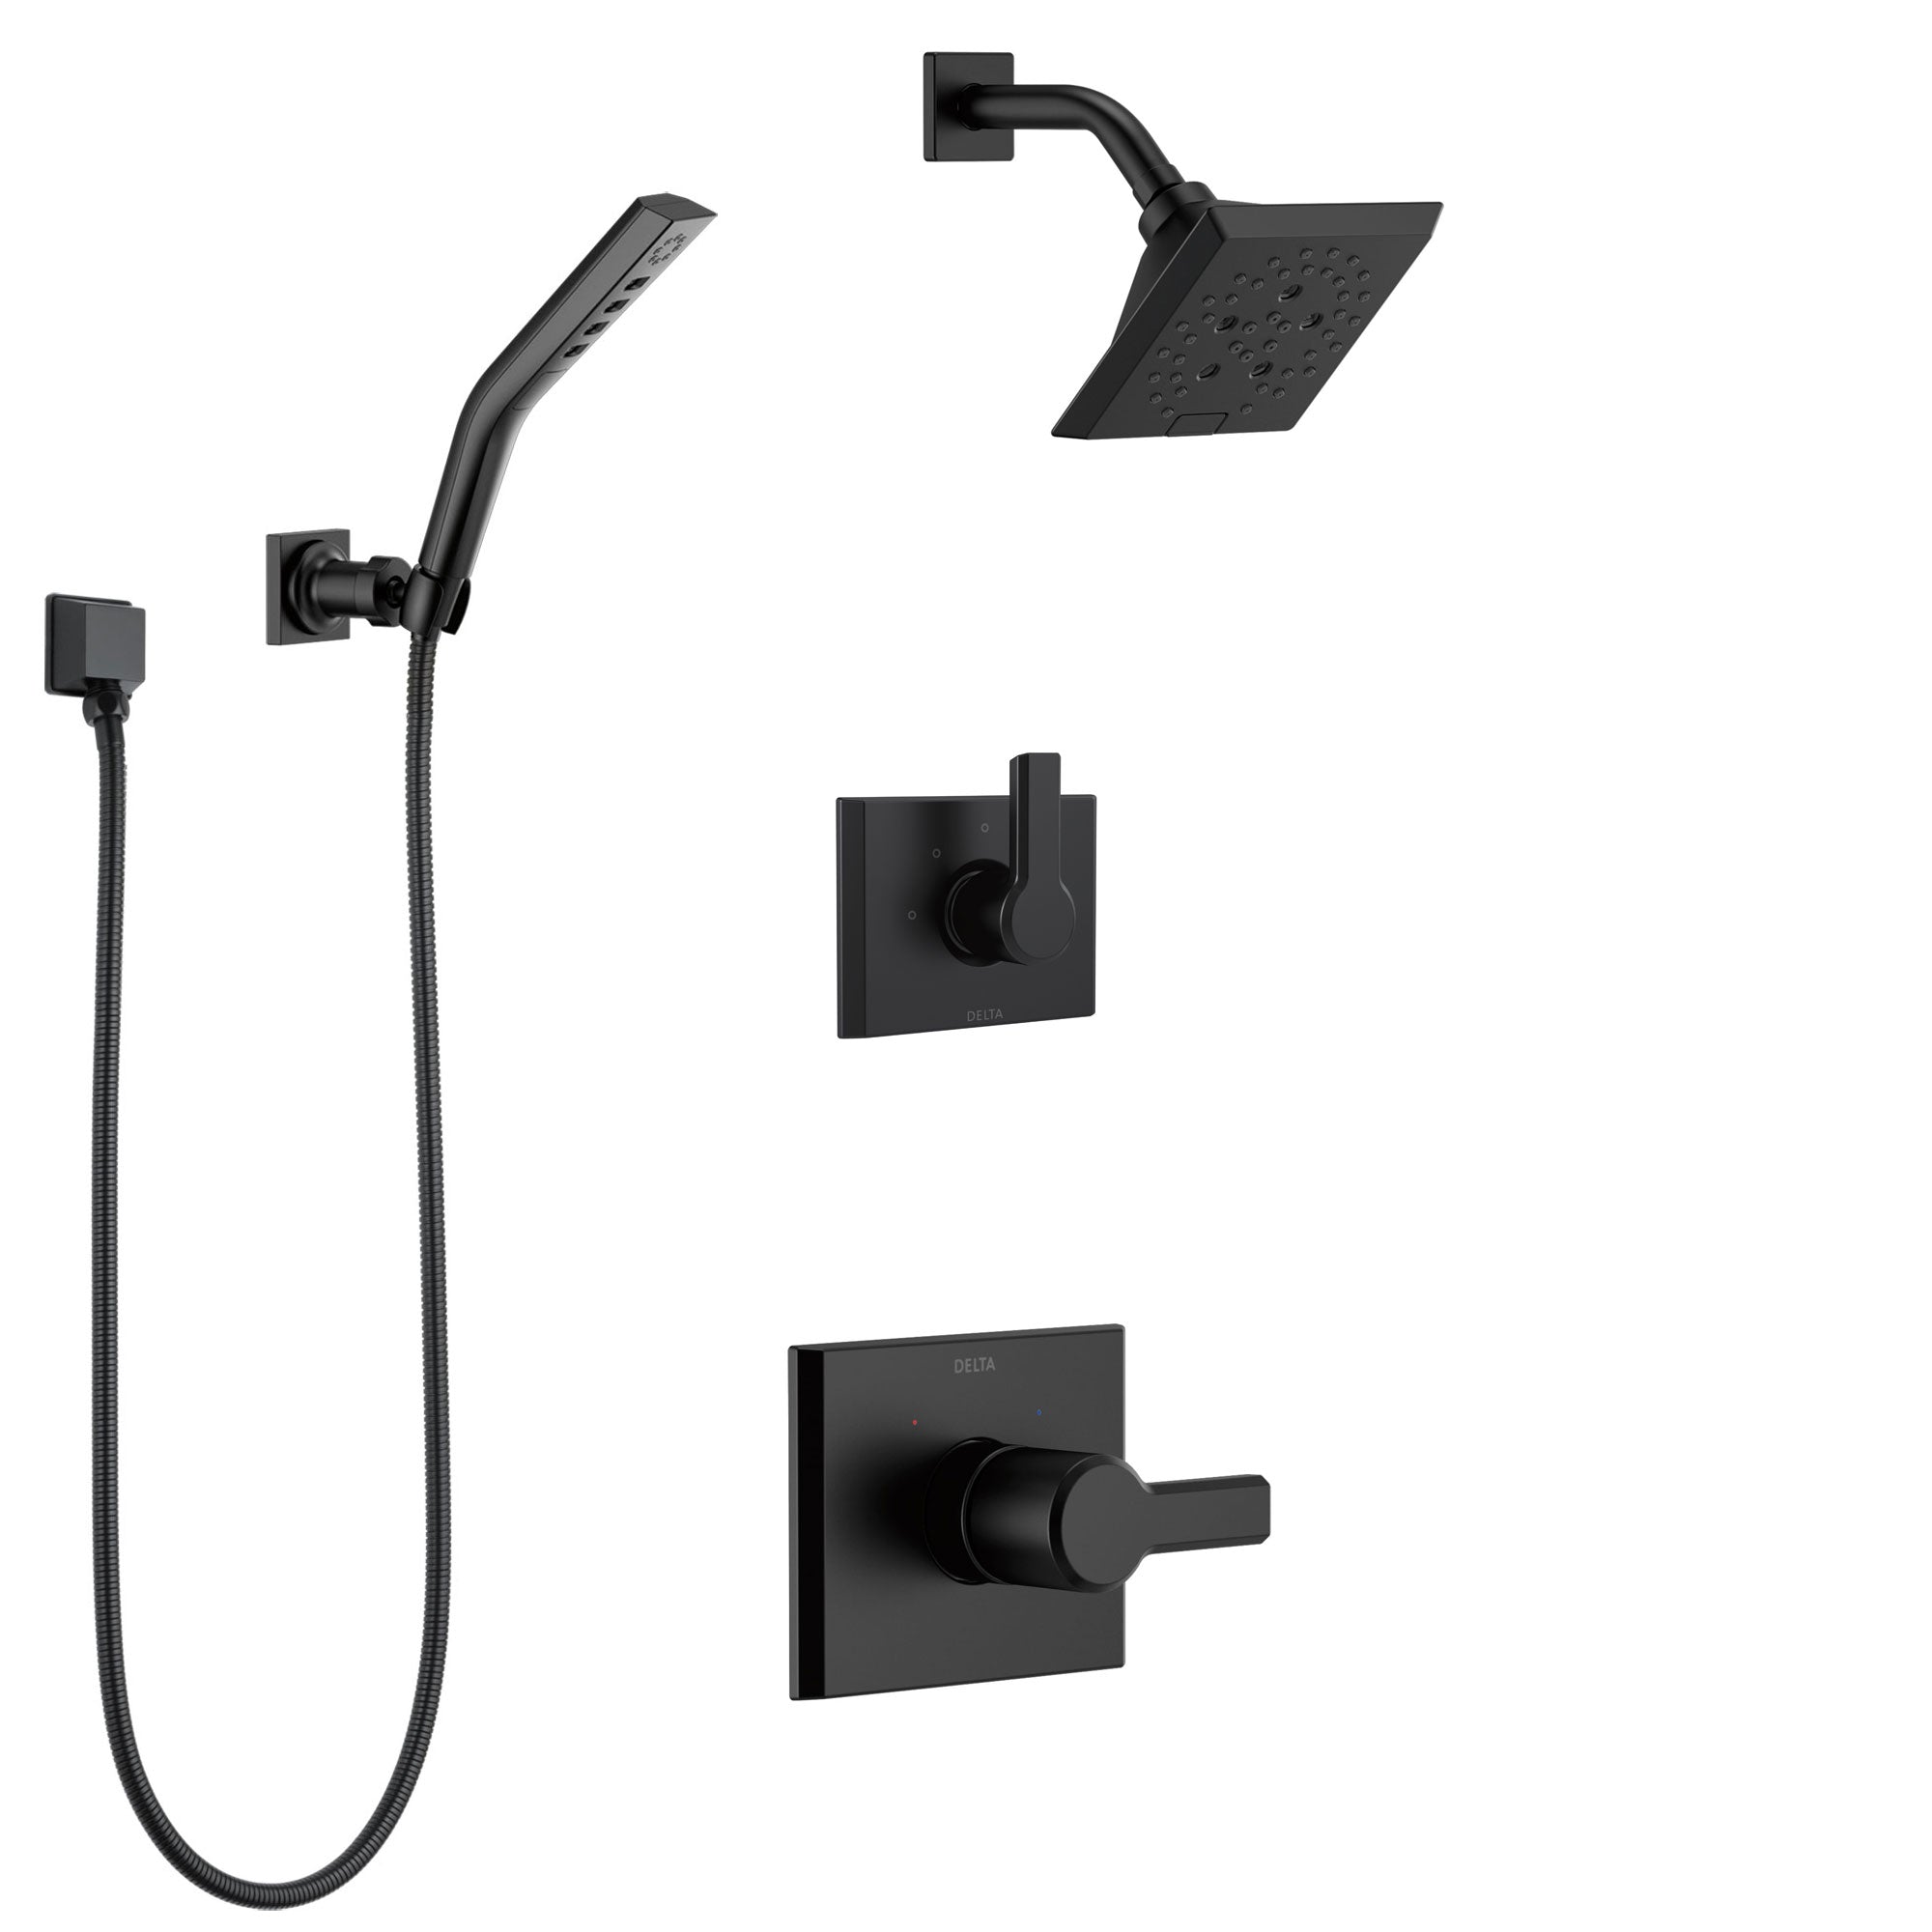 Delta Pivotal Matte Black Finish Modern Shower System with Diverter, Wall Mounted Hand Shower, and Multi-Setting Showerhead SS142993BL4